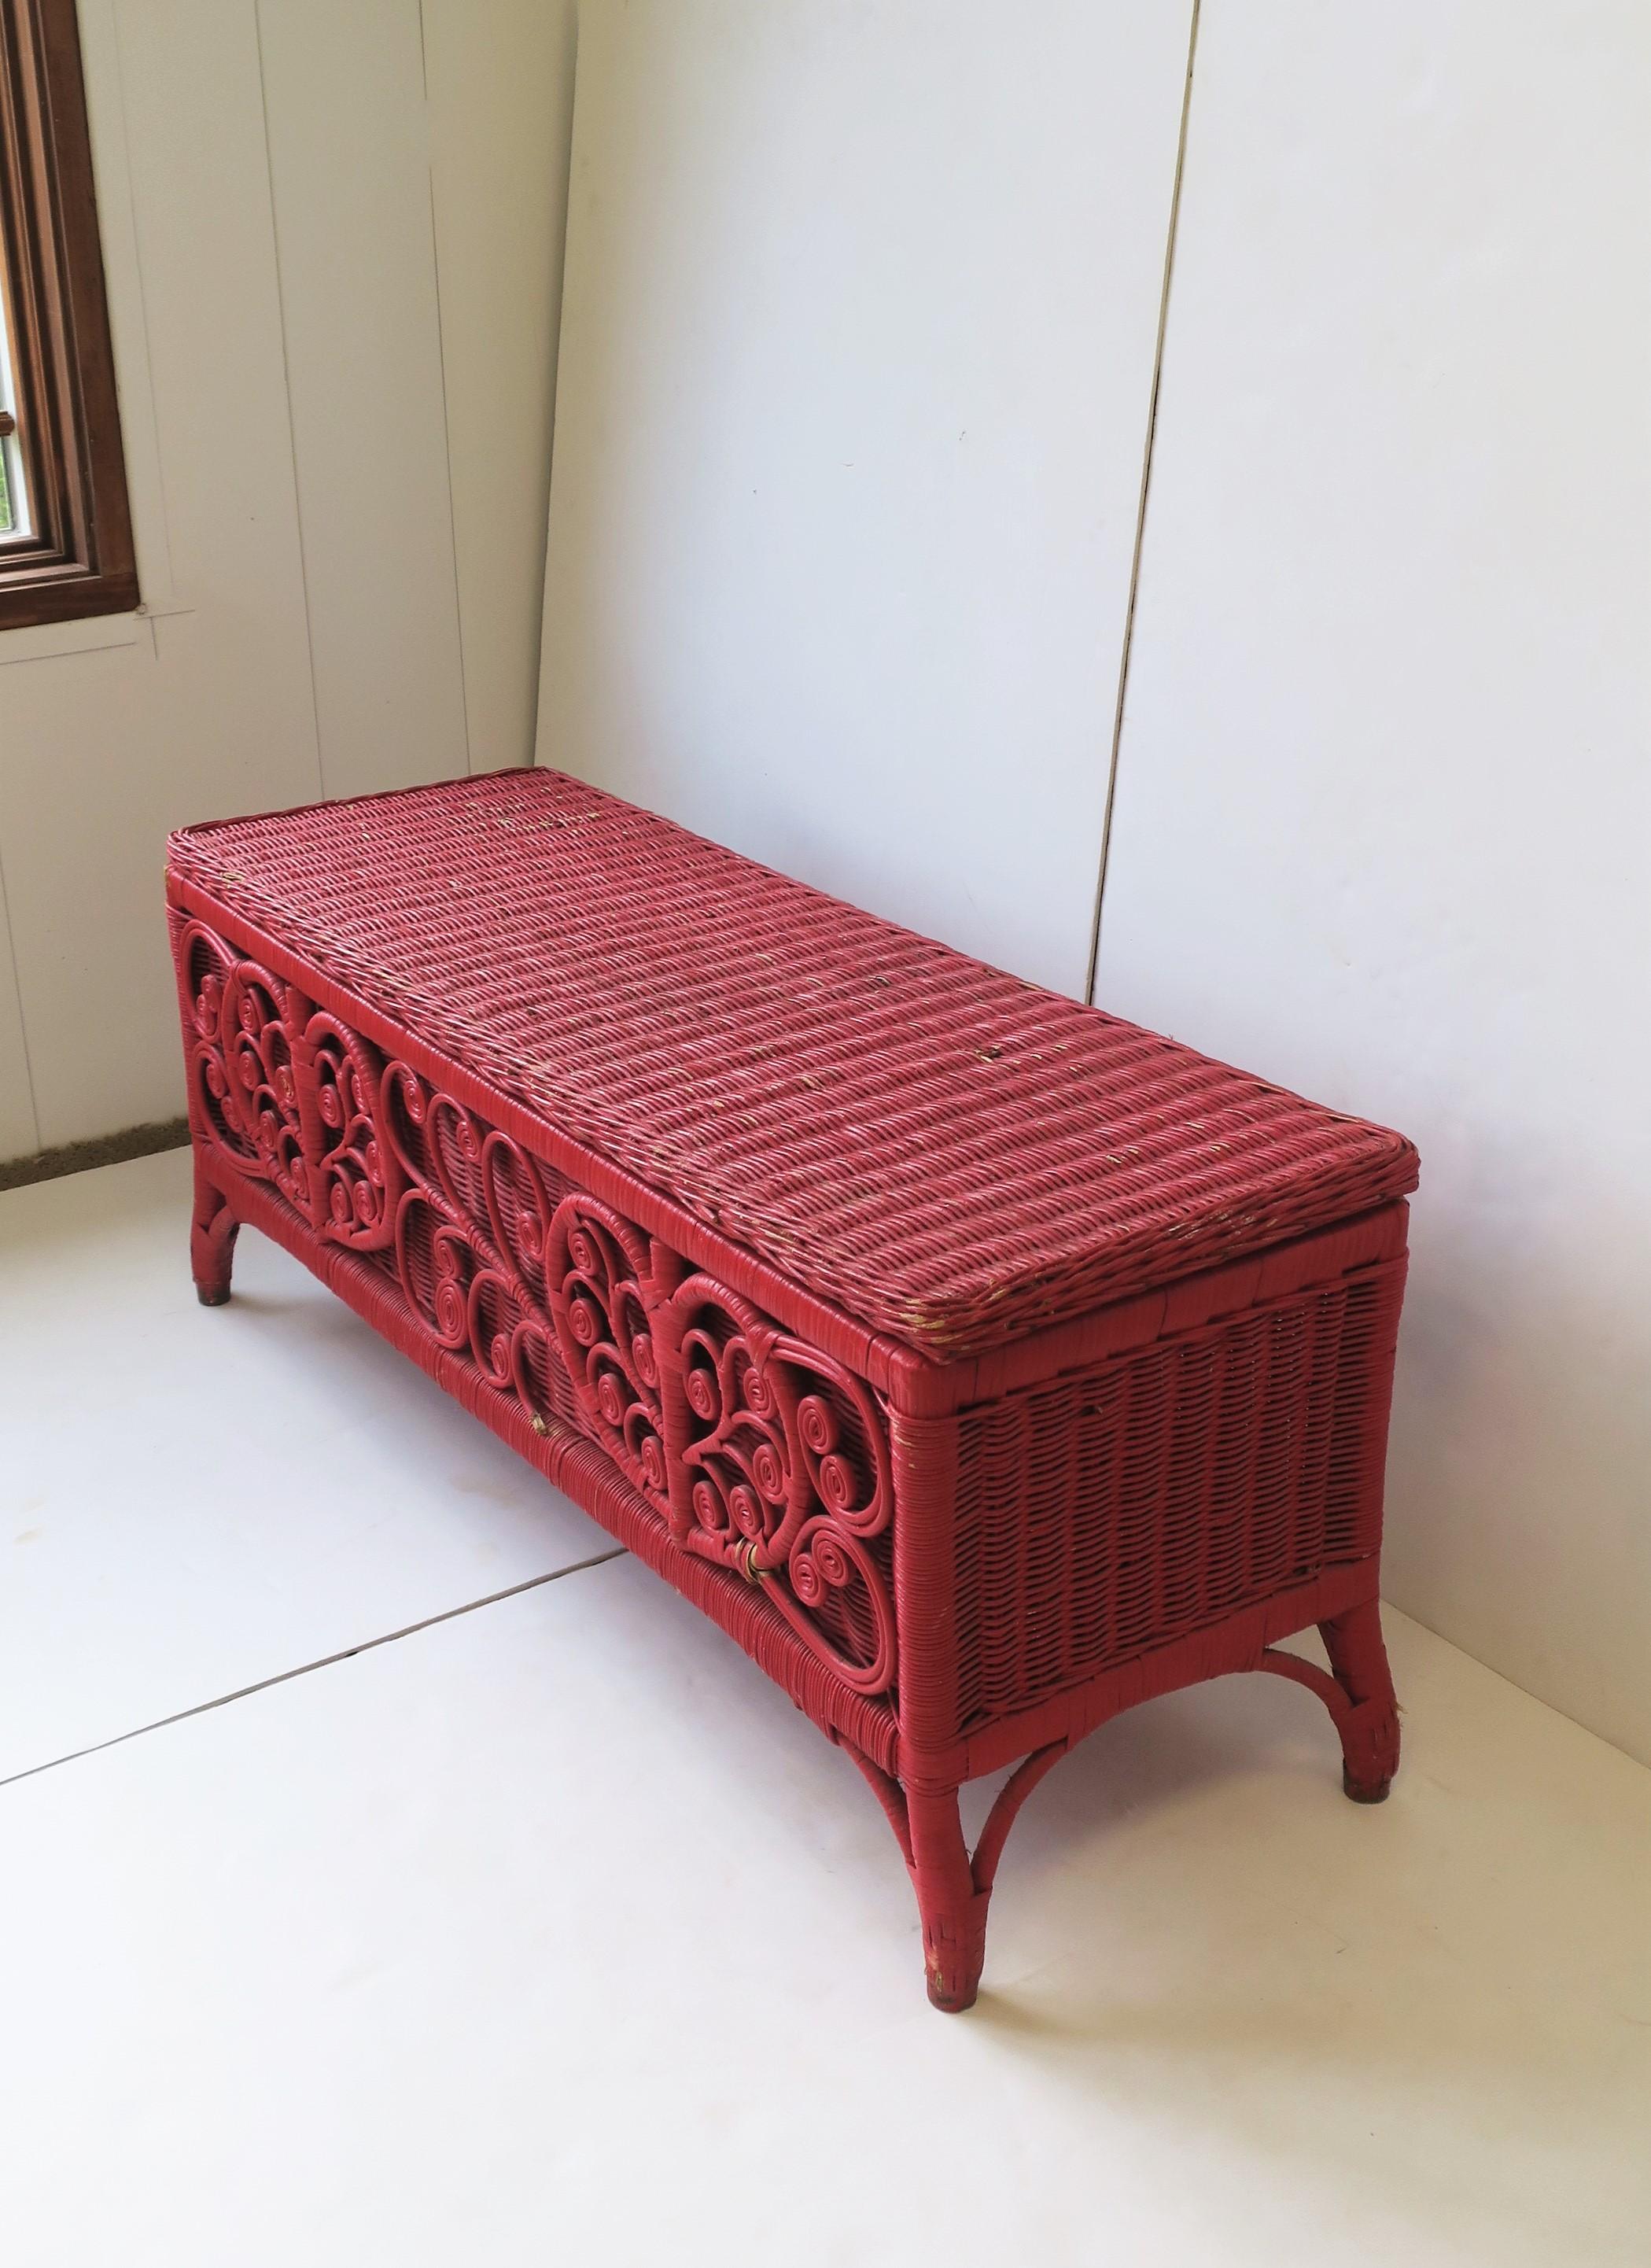 Mid-20th Century Vintage Red Wicker Rattan Bench with Storage